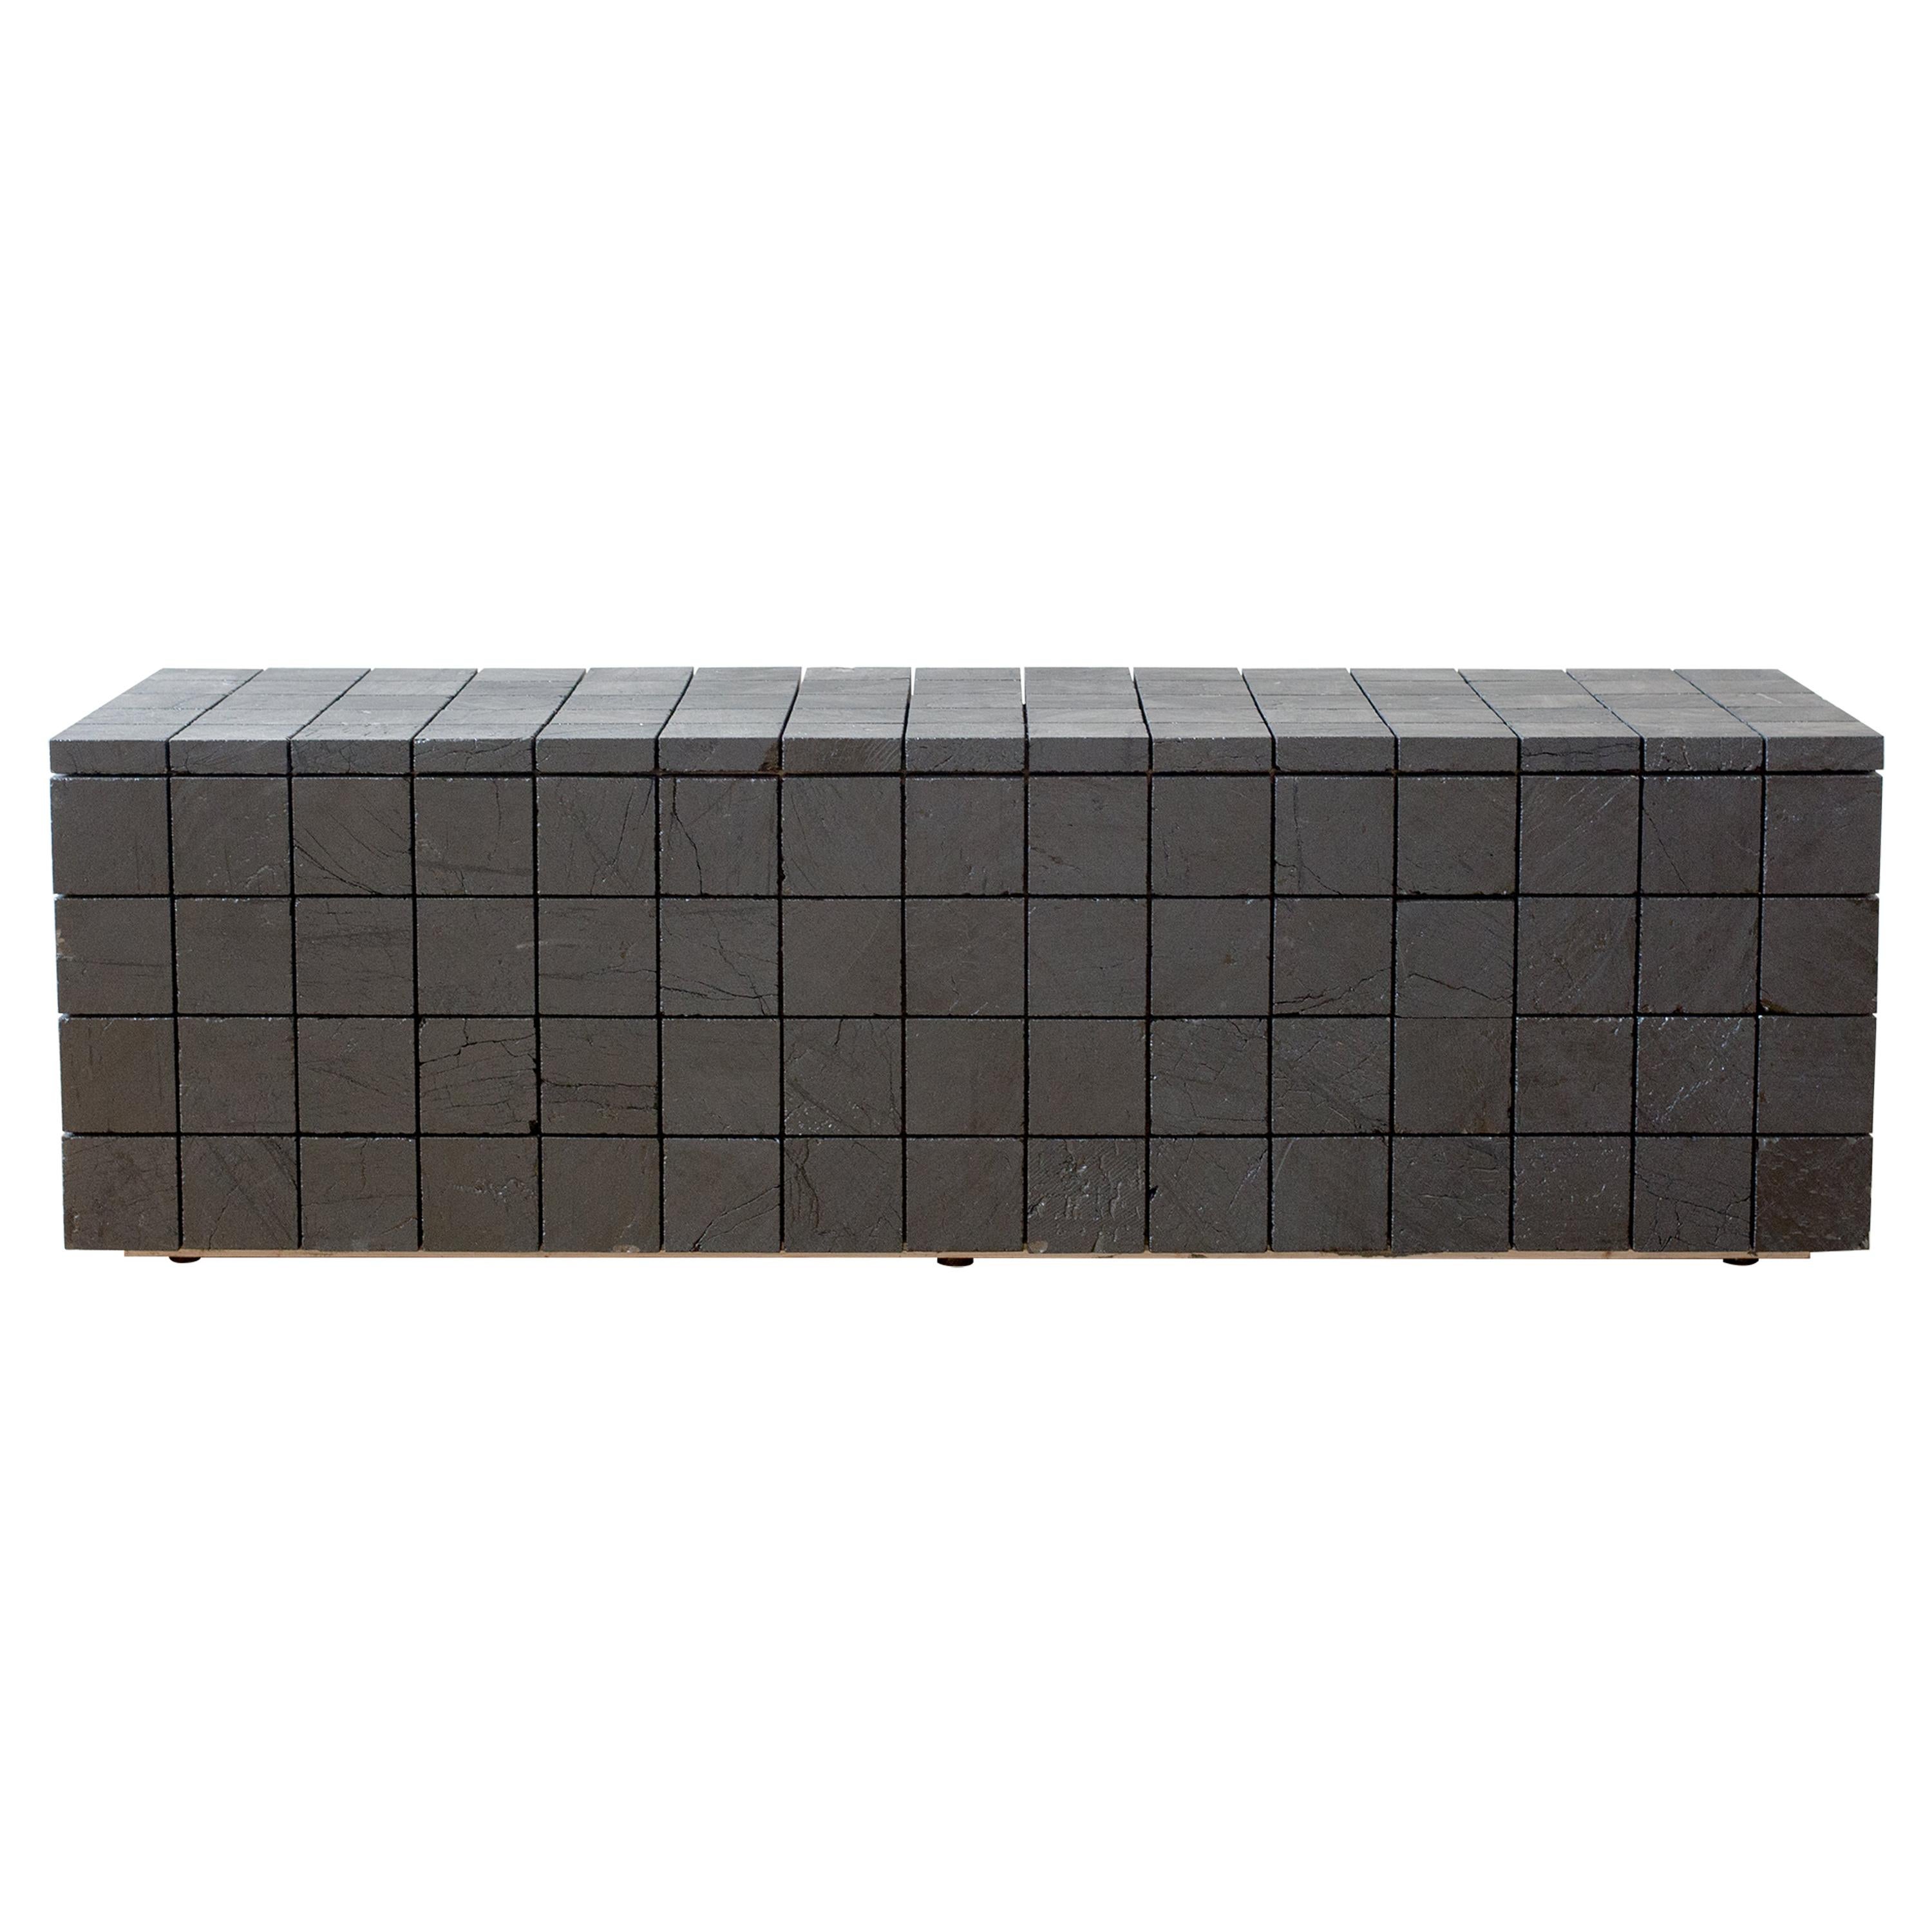 Anthracite Coal Bench Contemporary Seating